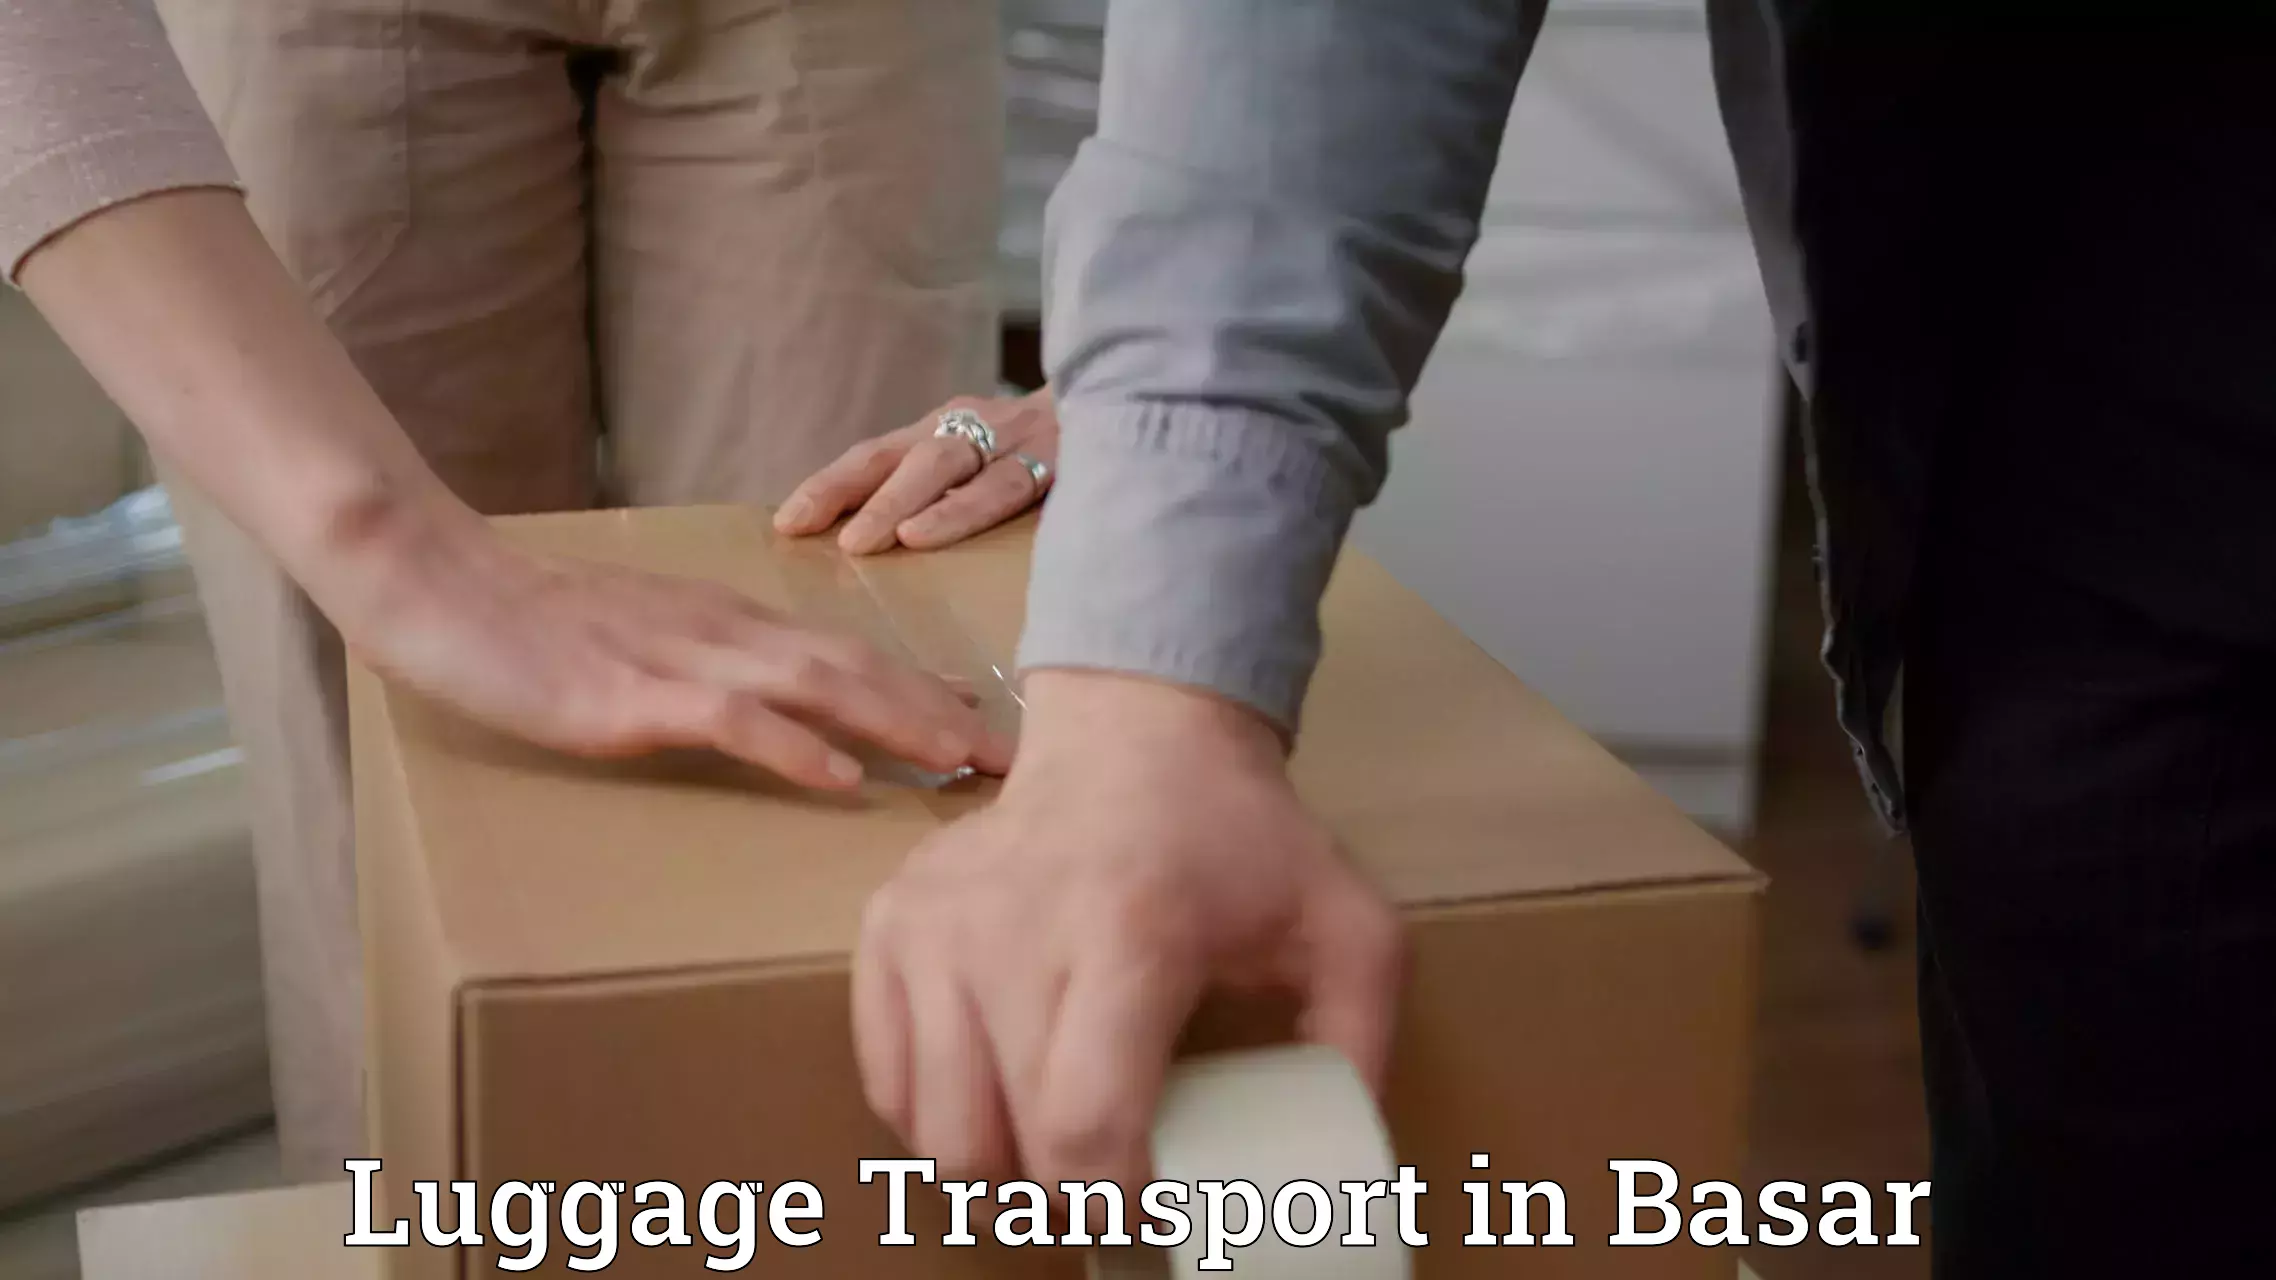 Luggage transport schedule in Basar